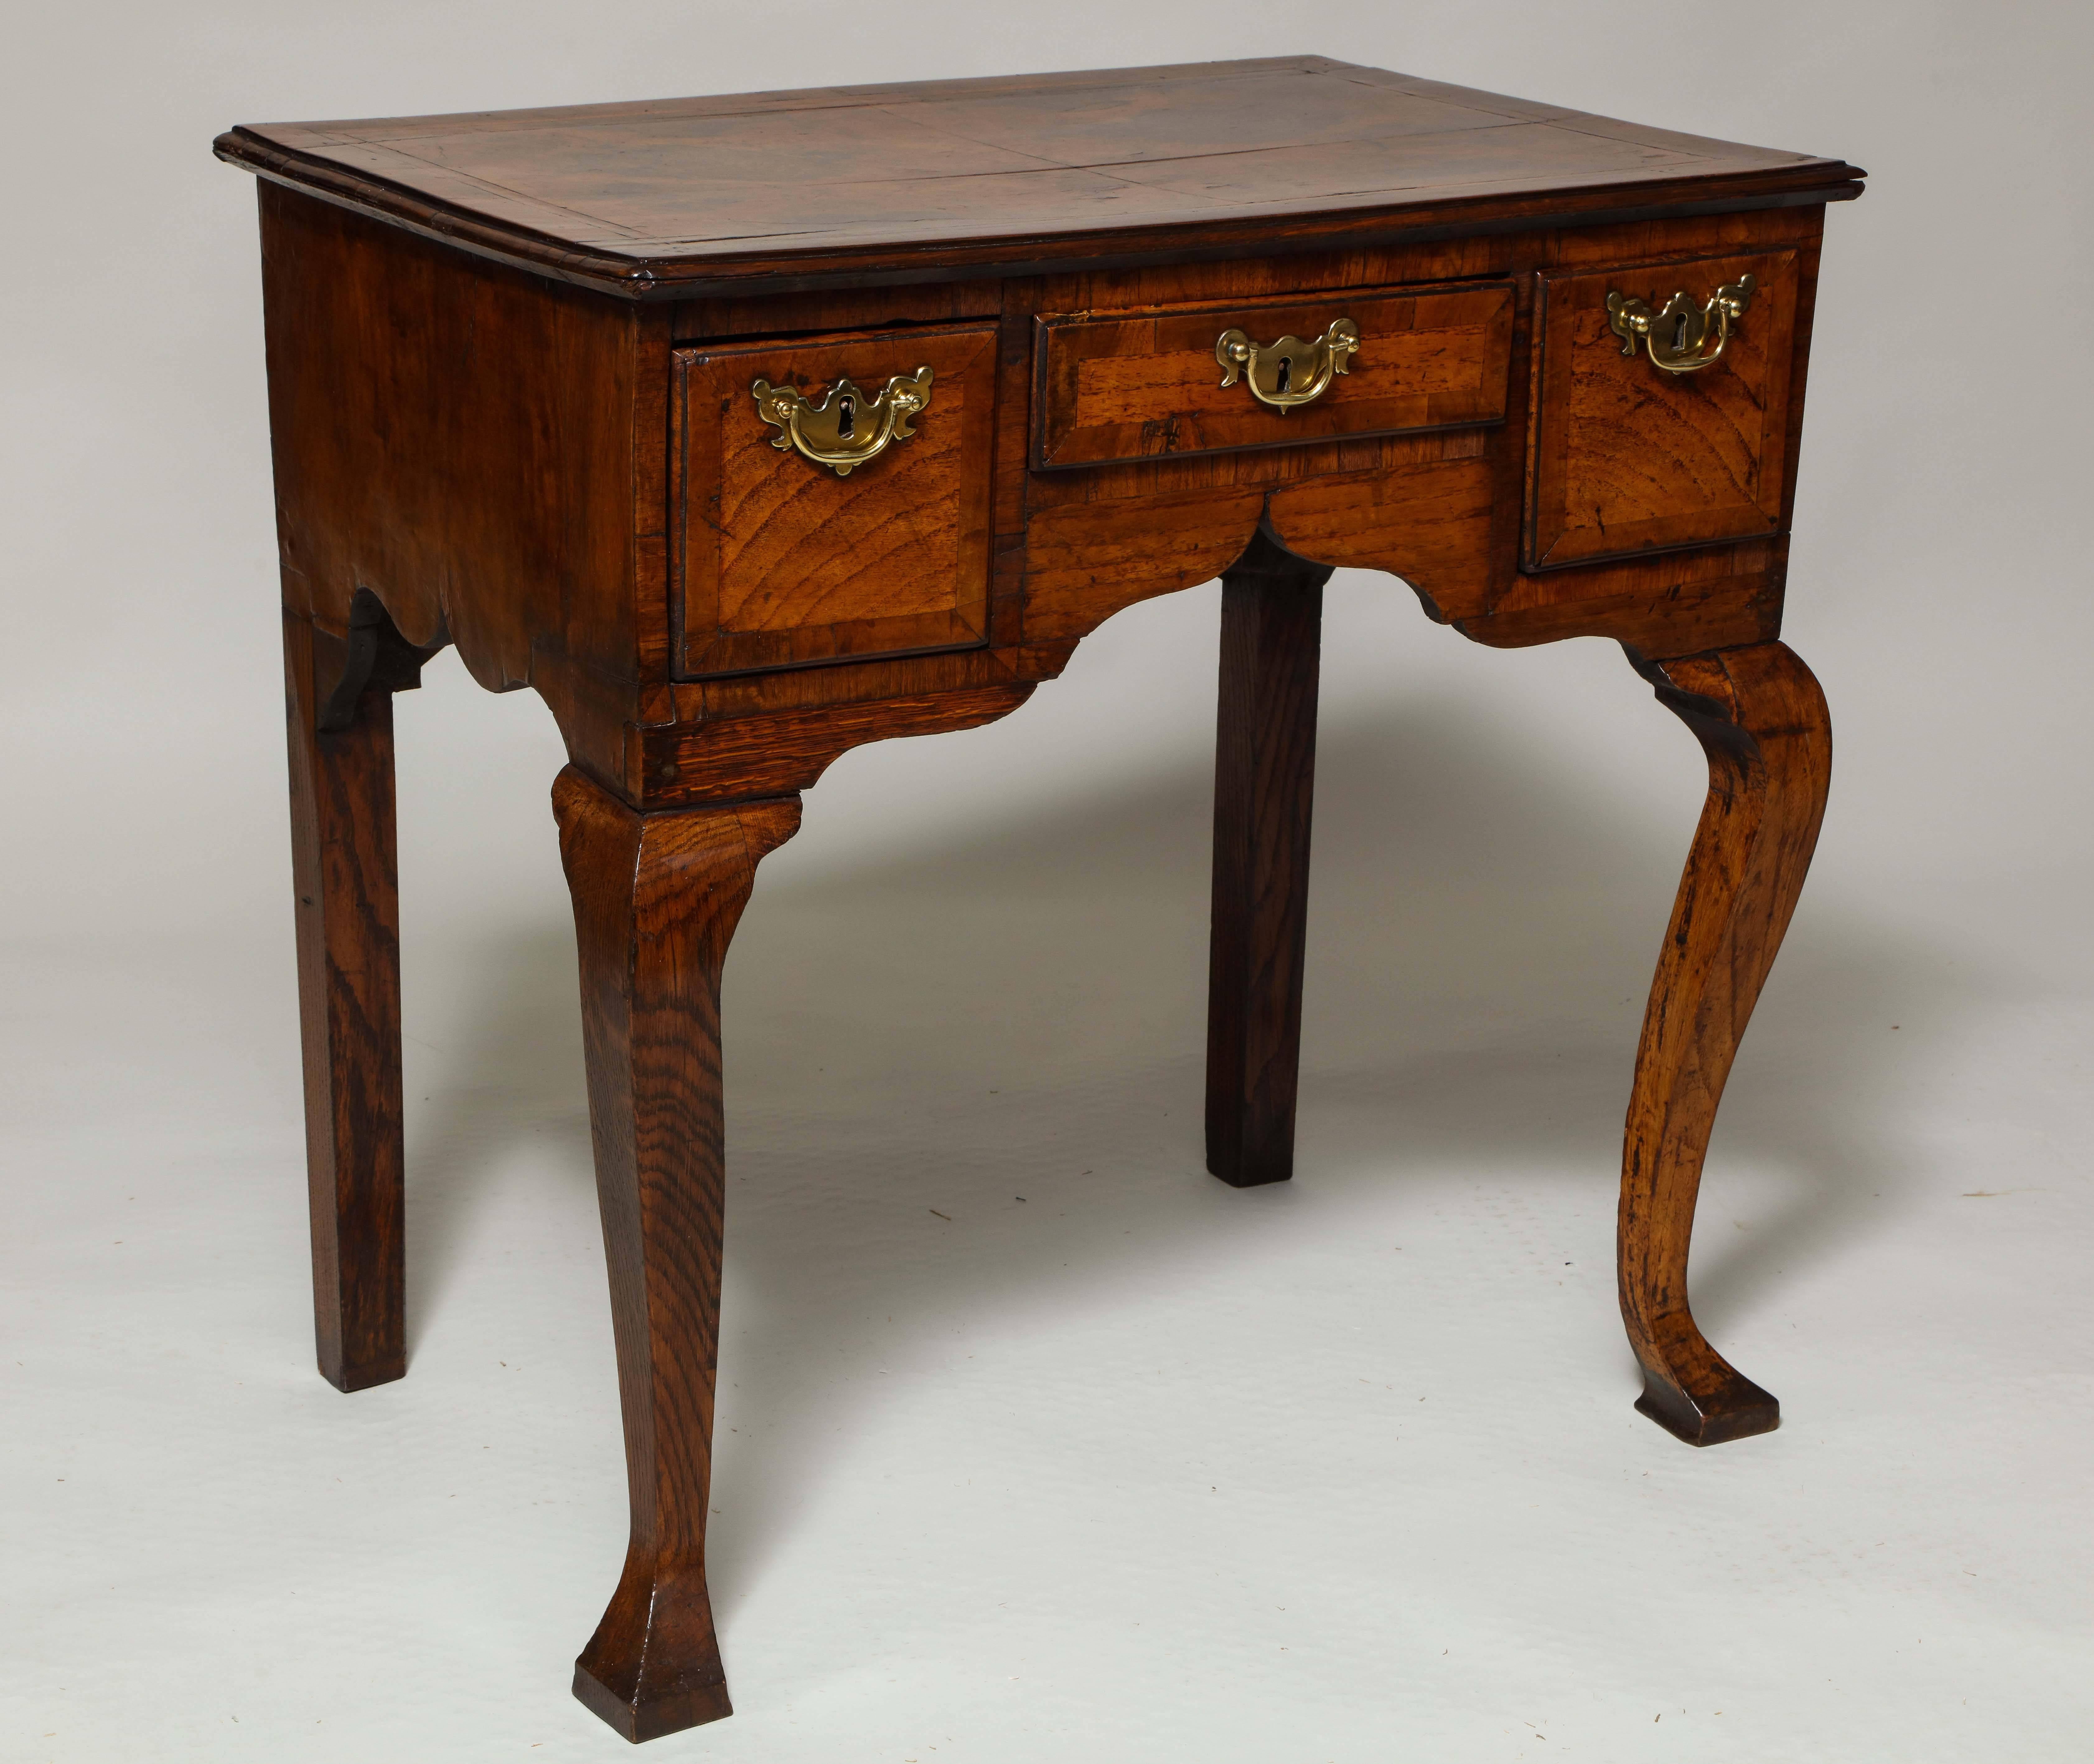 Early 18th Century English Oak and Walnut Dressing Table